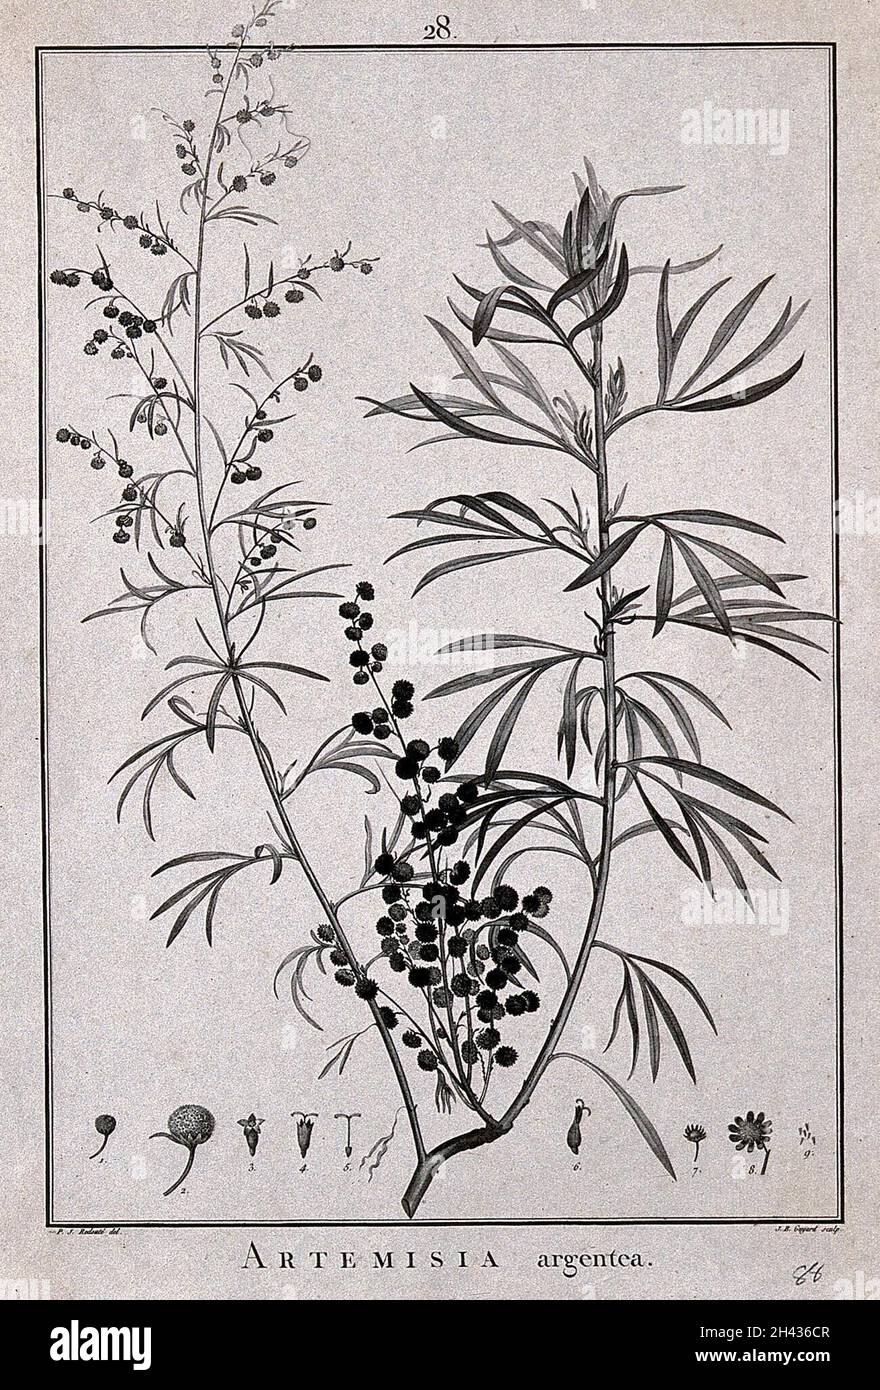 Artemisia argentea: flowering and fruiting stem and floral segments. Line engraving by J. B. Guyard, c. 1788, after P. J. Redouté. Stock Photo